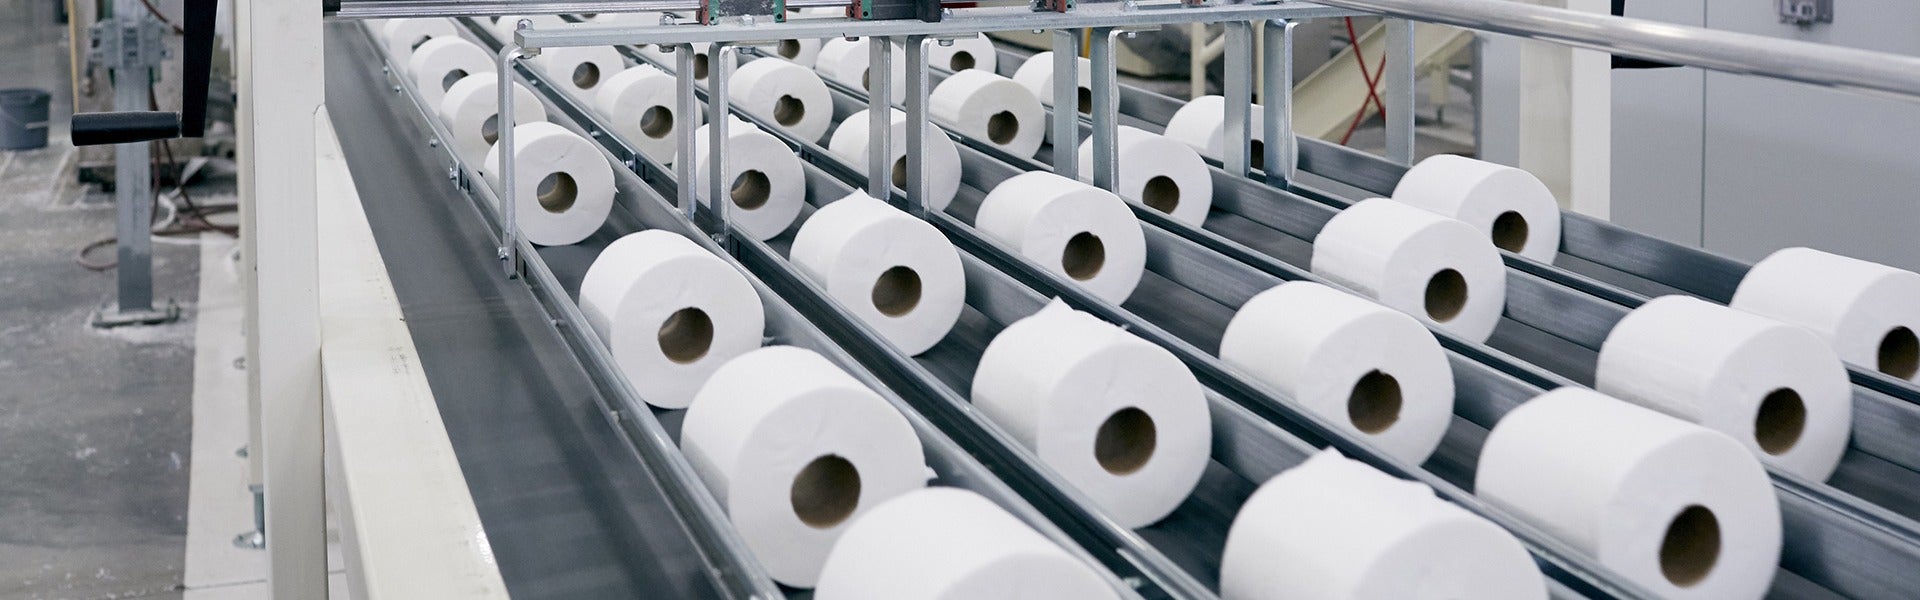 Toilet paper is getting less sustainable, researchers warn, Trees and  forests